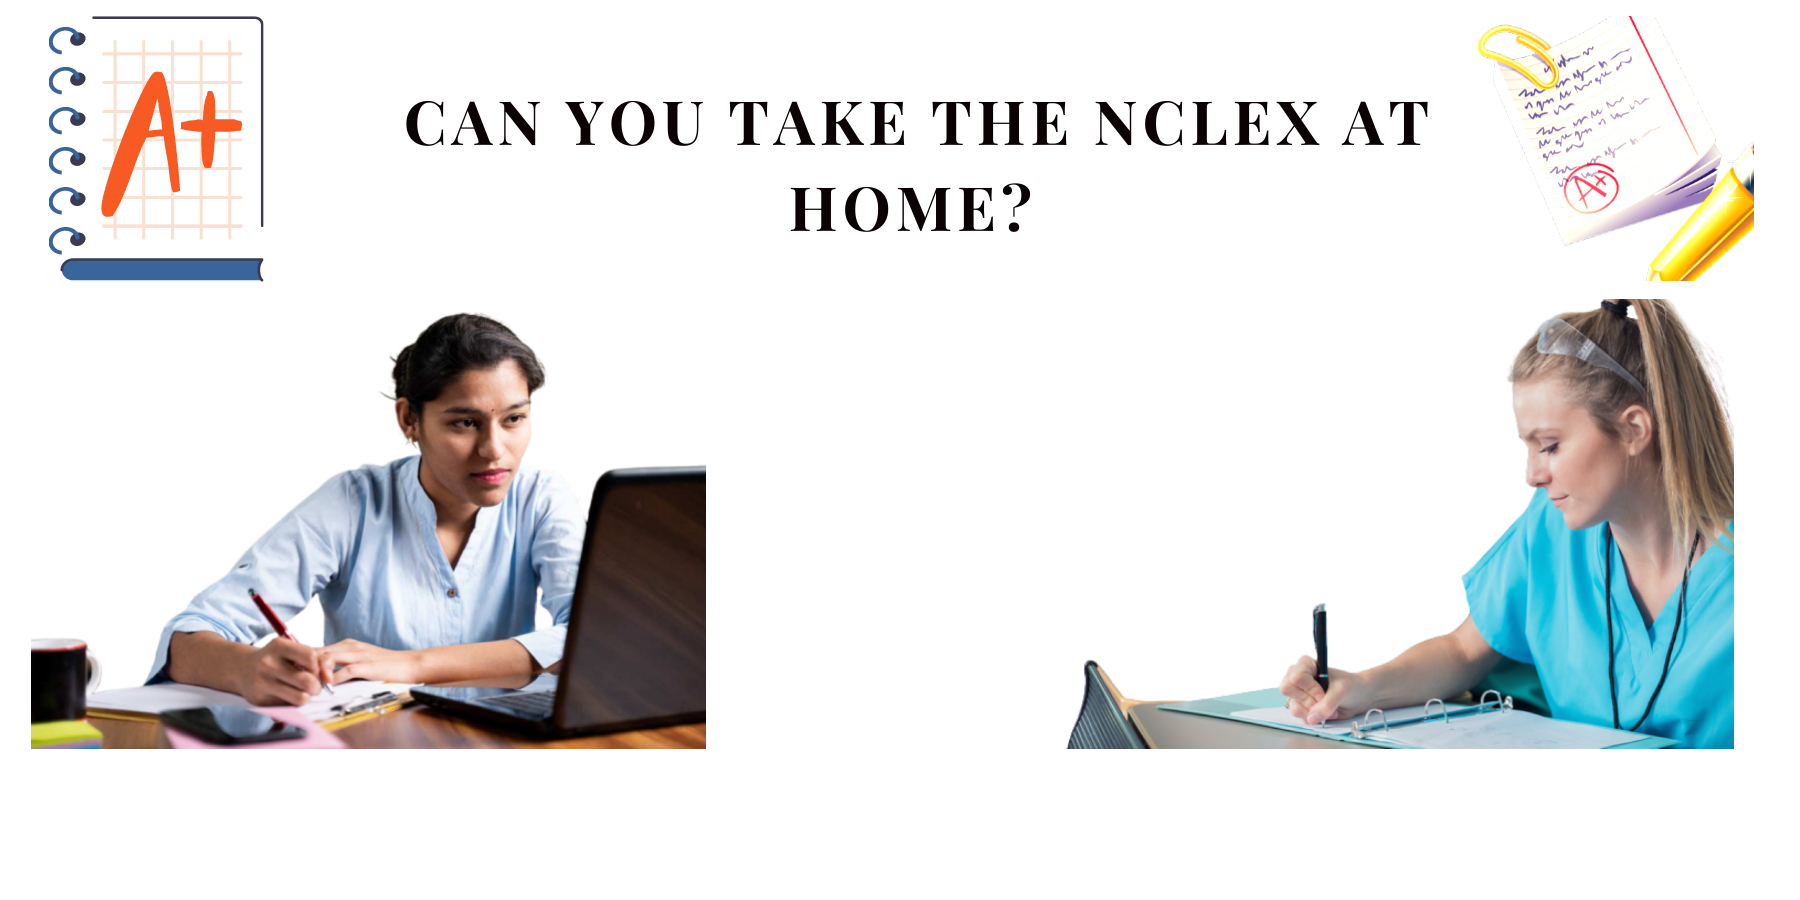 can-you-take-the-nclex-exam-at-home